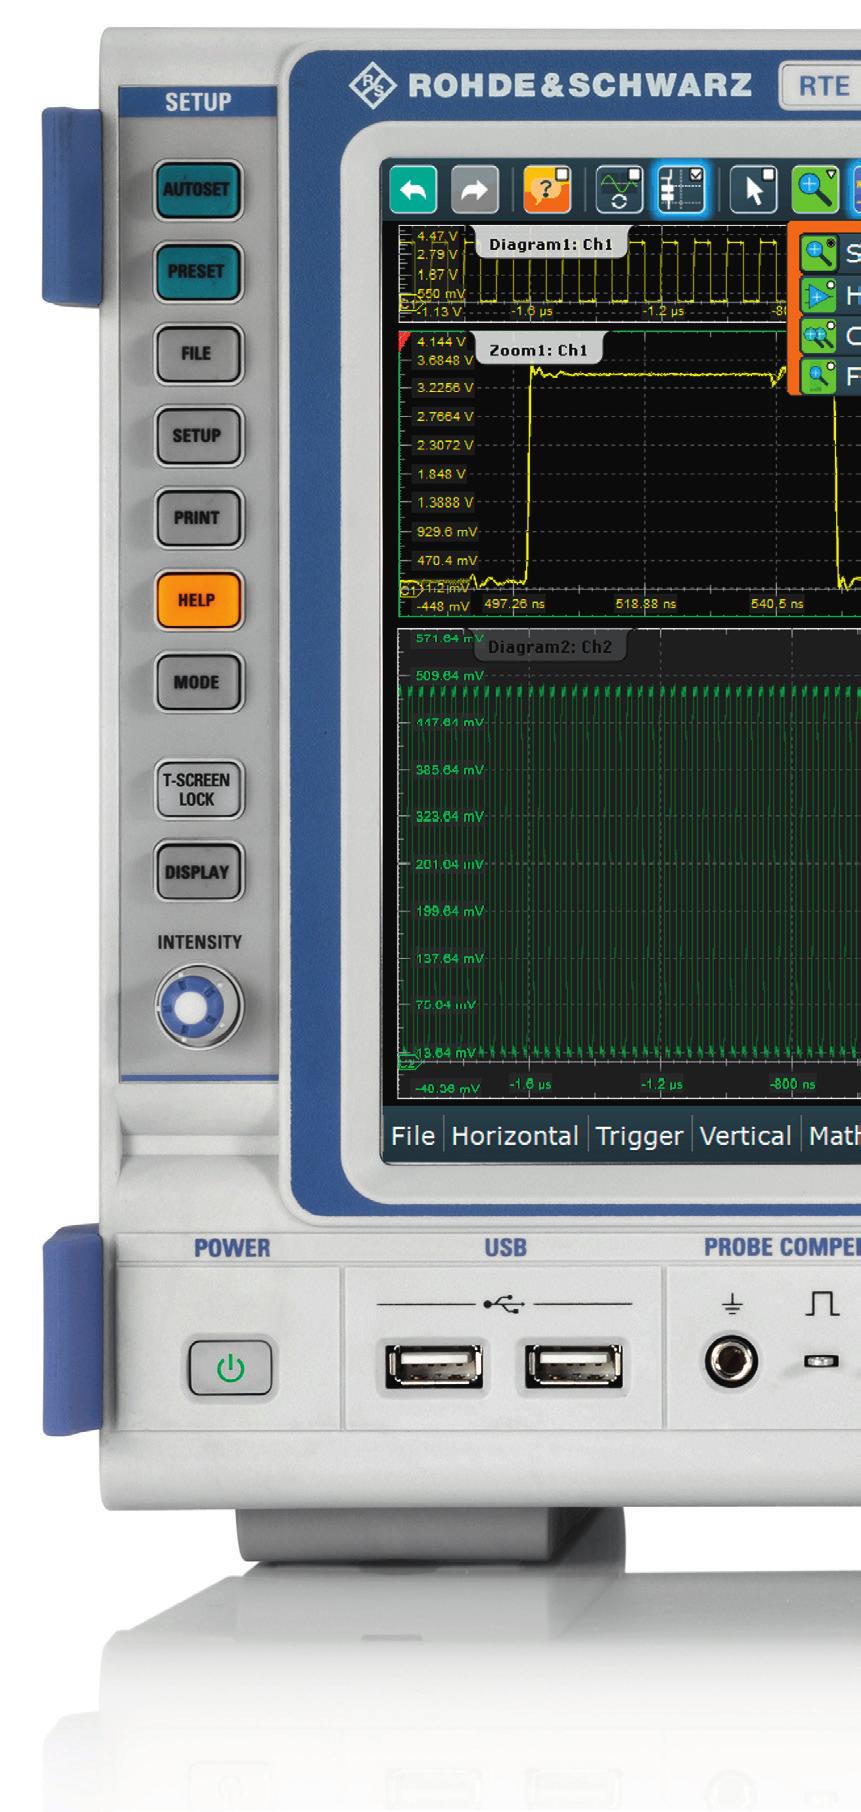 More fun to use The R&S RTE oscilloscopes unite established concepts with new features and turn user wishes into reality: Just unpack the instrument, switch it on and measure.